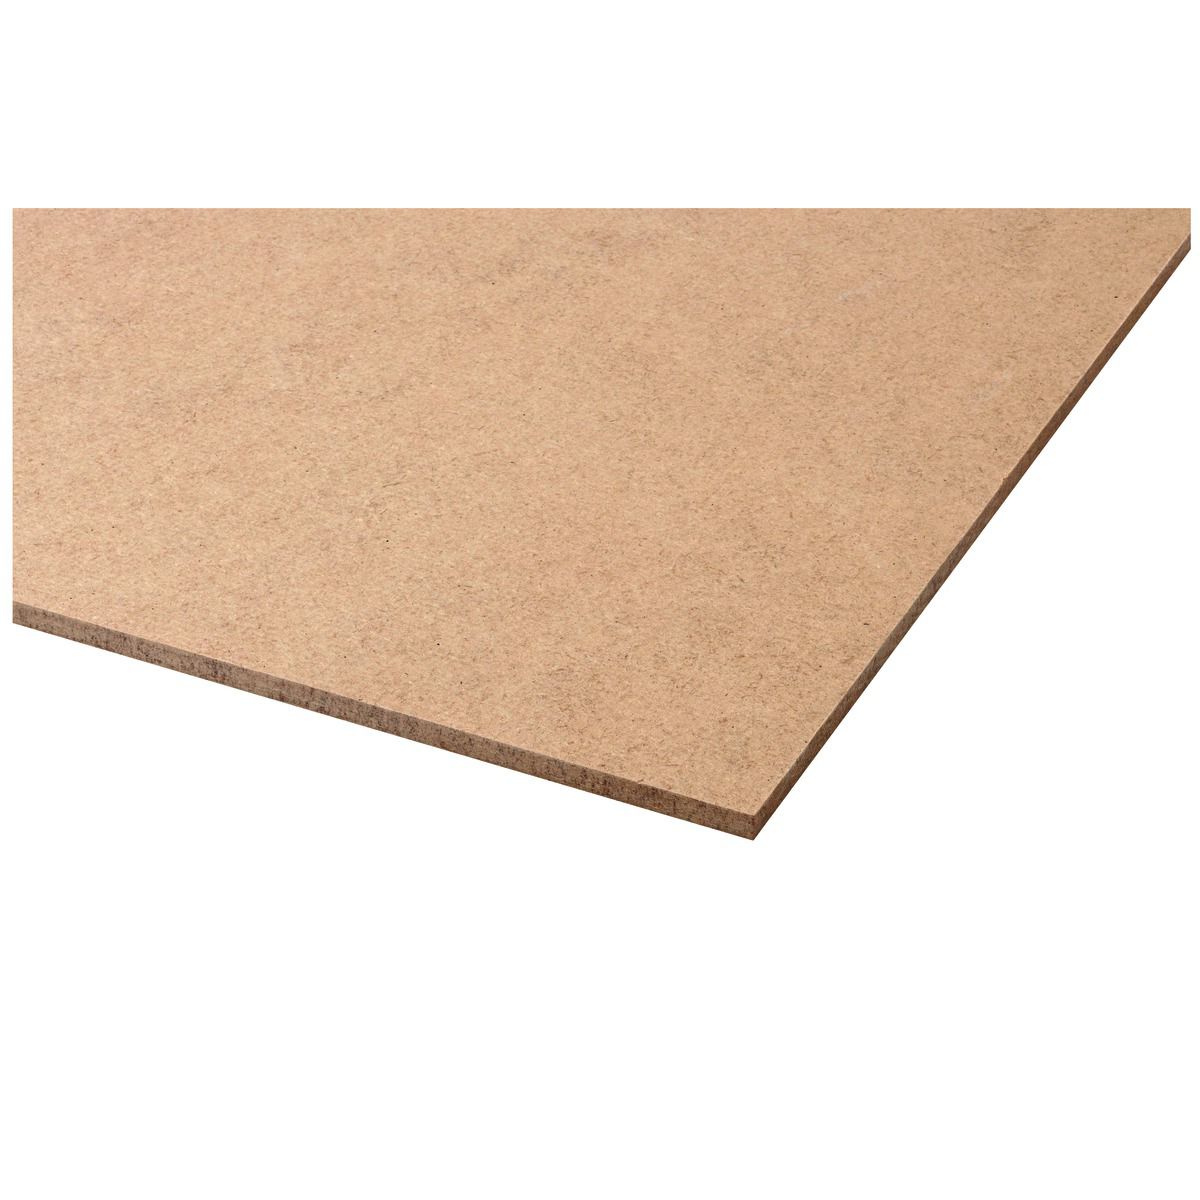 Image of Wickes High Quality General Purpose Natural Hardboard Sheet - 3x1220x2440mm